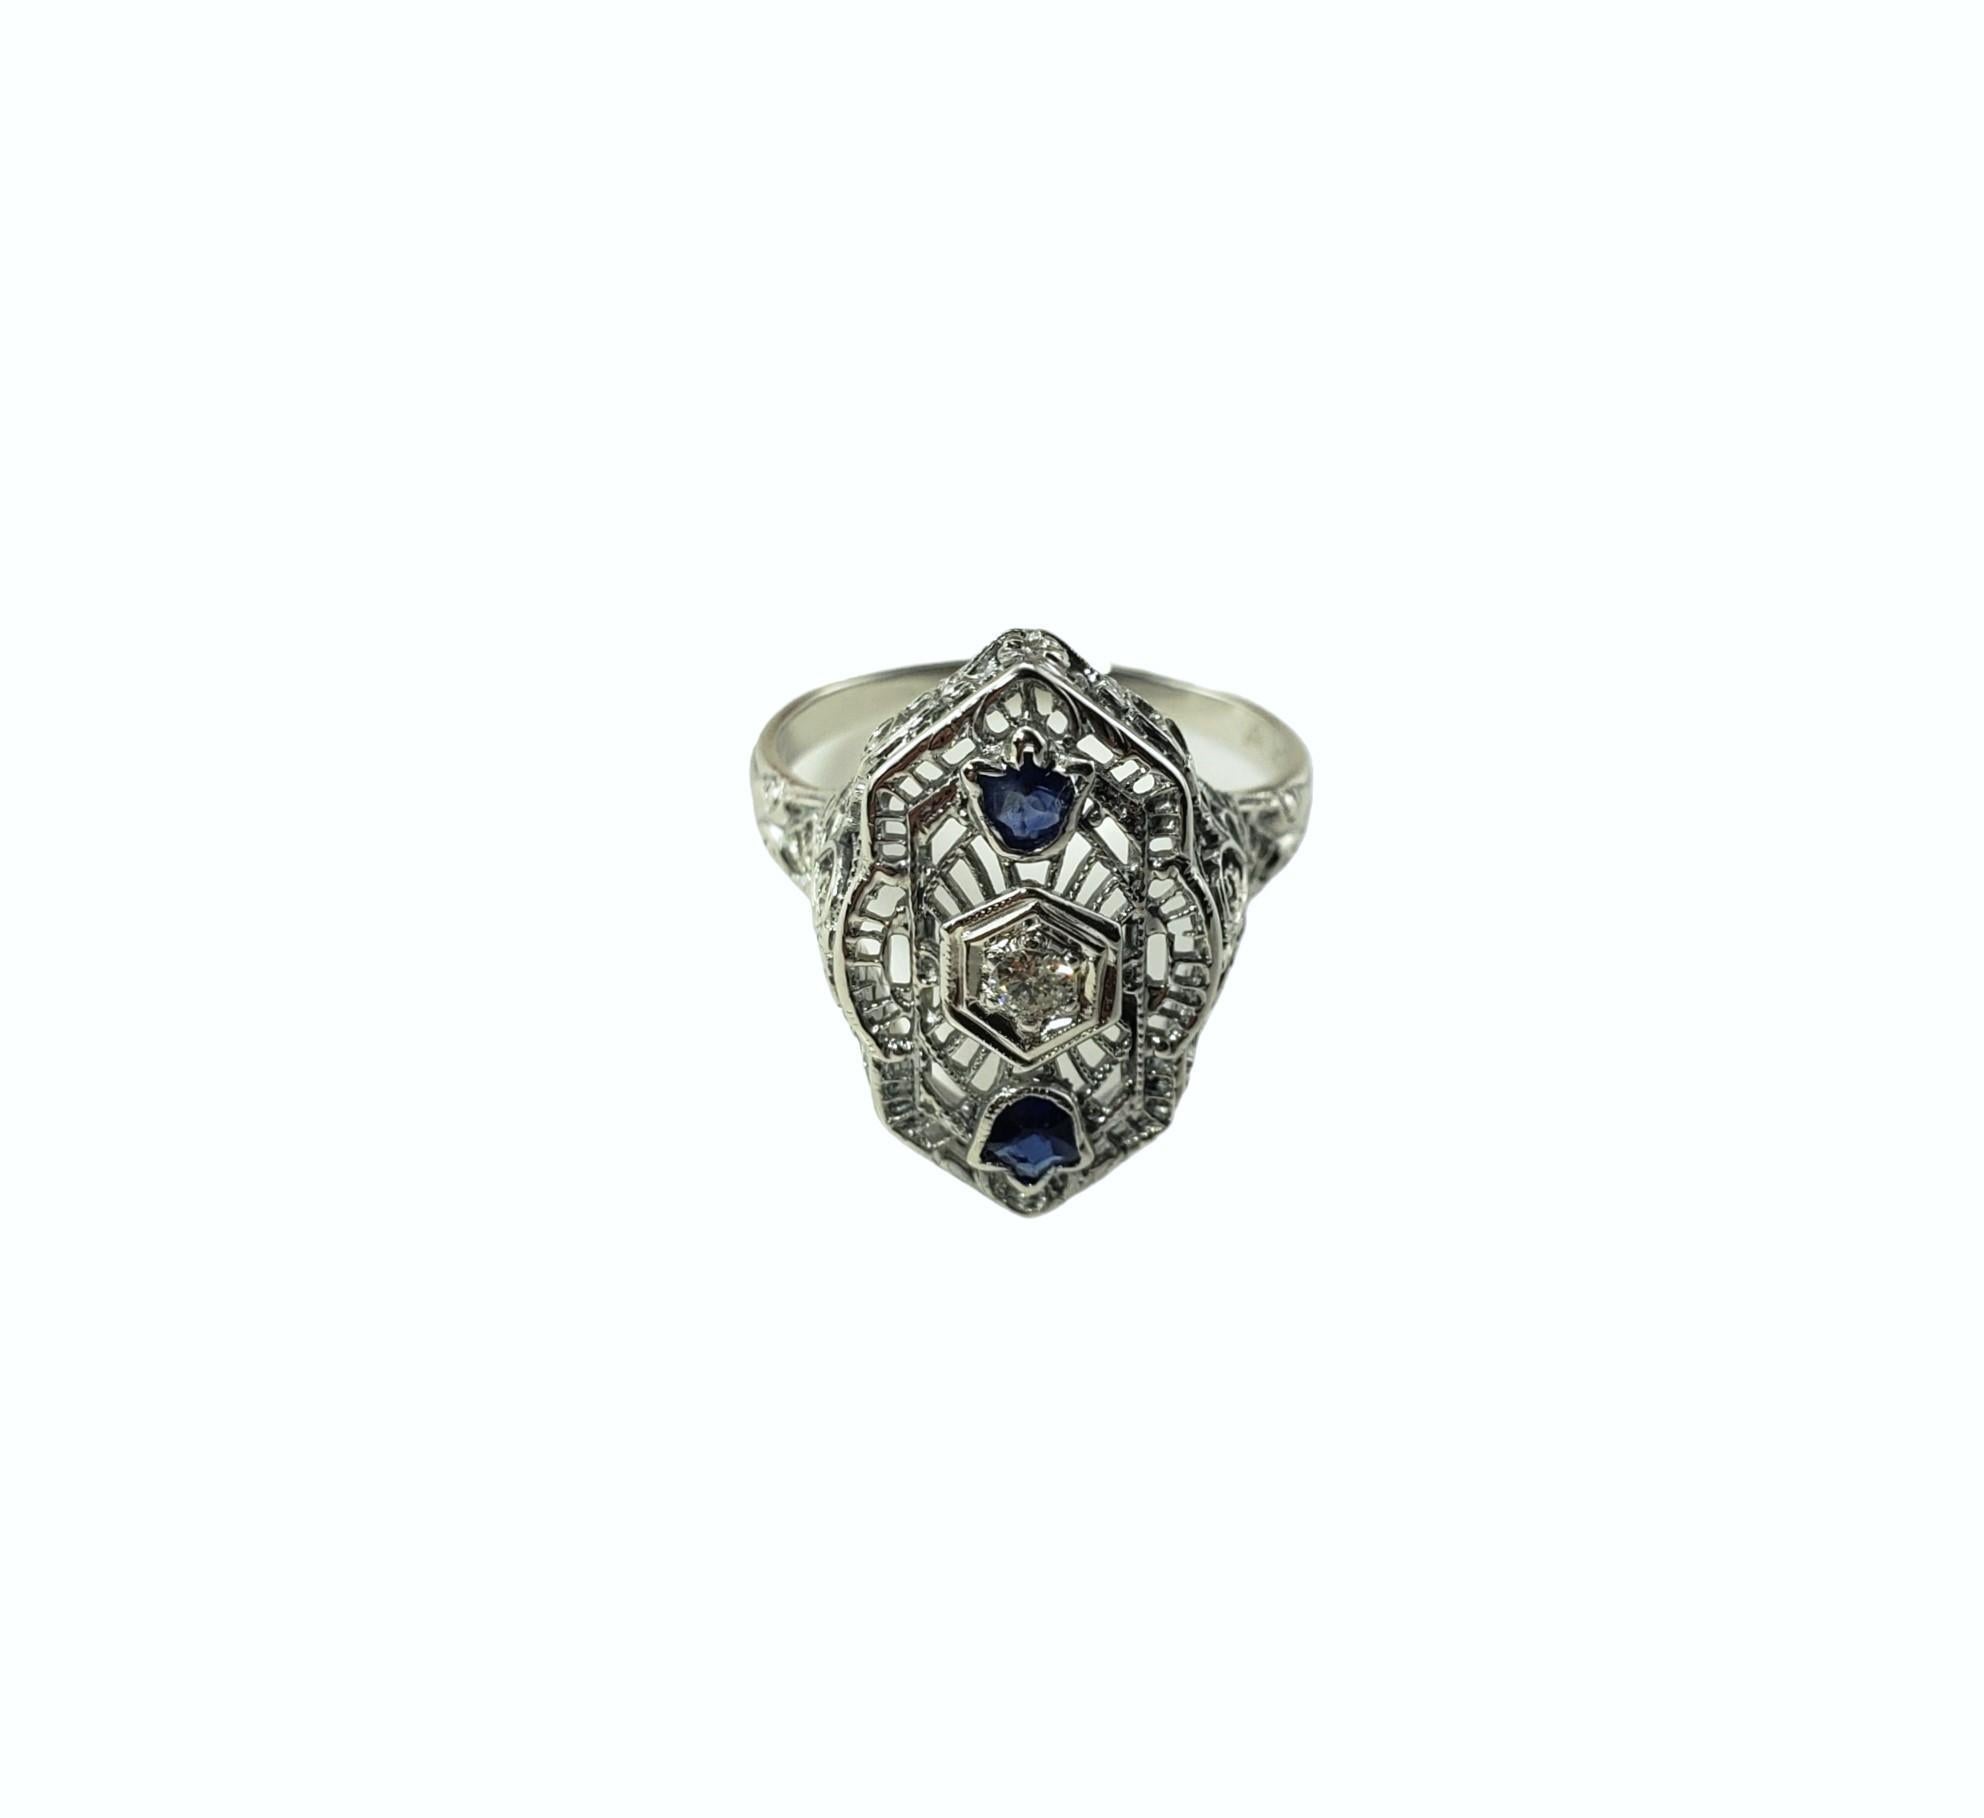 Vintage 18K White Gold Sapphire and Diamond Ring Size 6.75-

This elegant ring features one round brilliant cut diamond and two fancy cut blue sapphires set in beautifully detailed 18K white gold filigree.  Top of ring measures 
18.7 mm x 13.1 mm. 